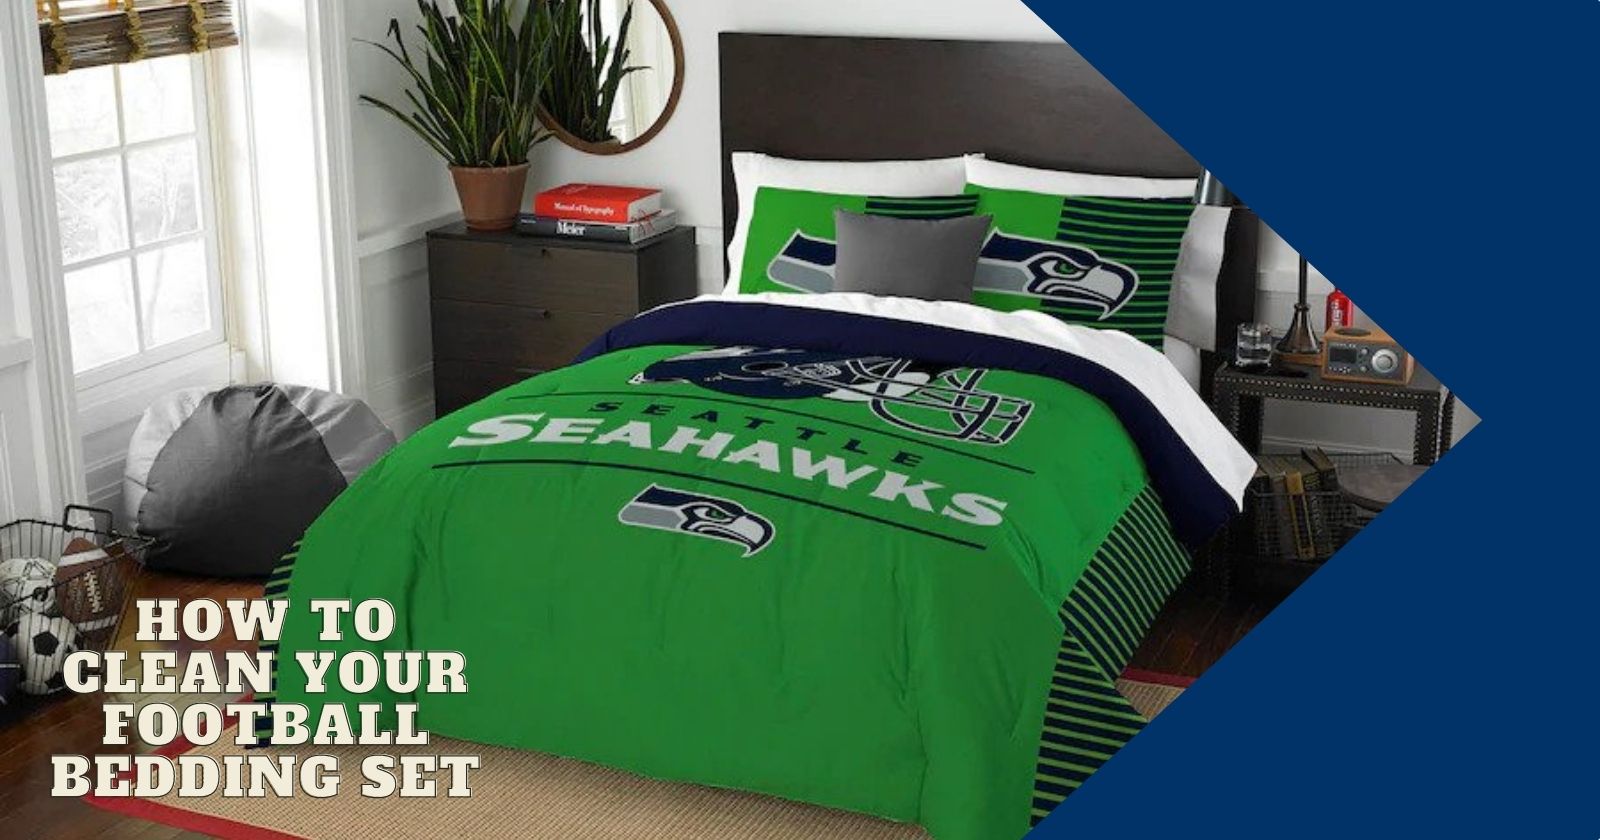 How To Clean Your Football Bedding Set - Discover